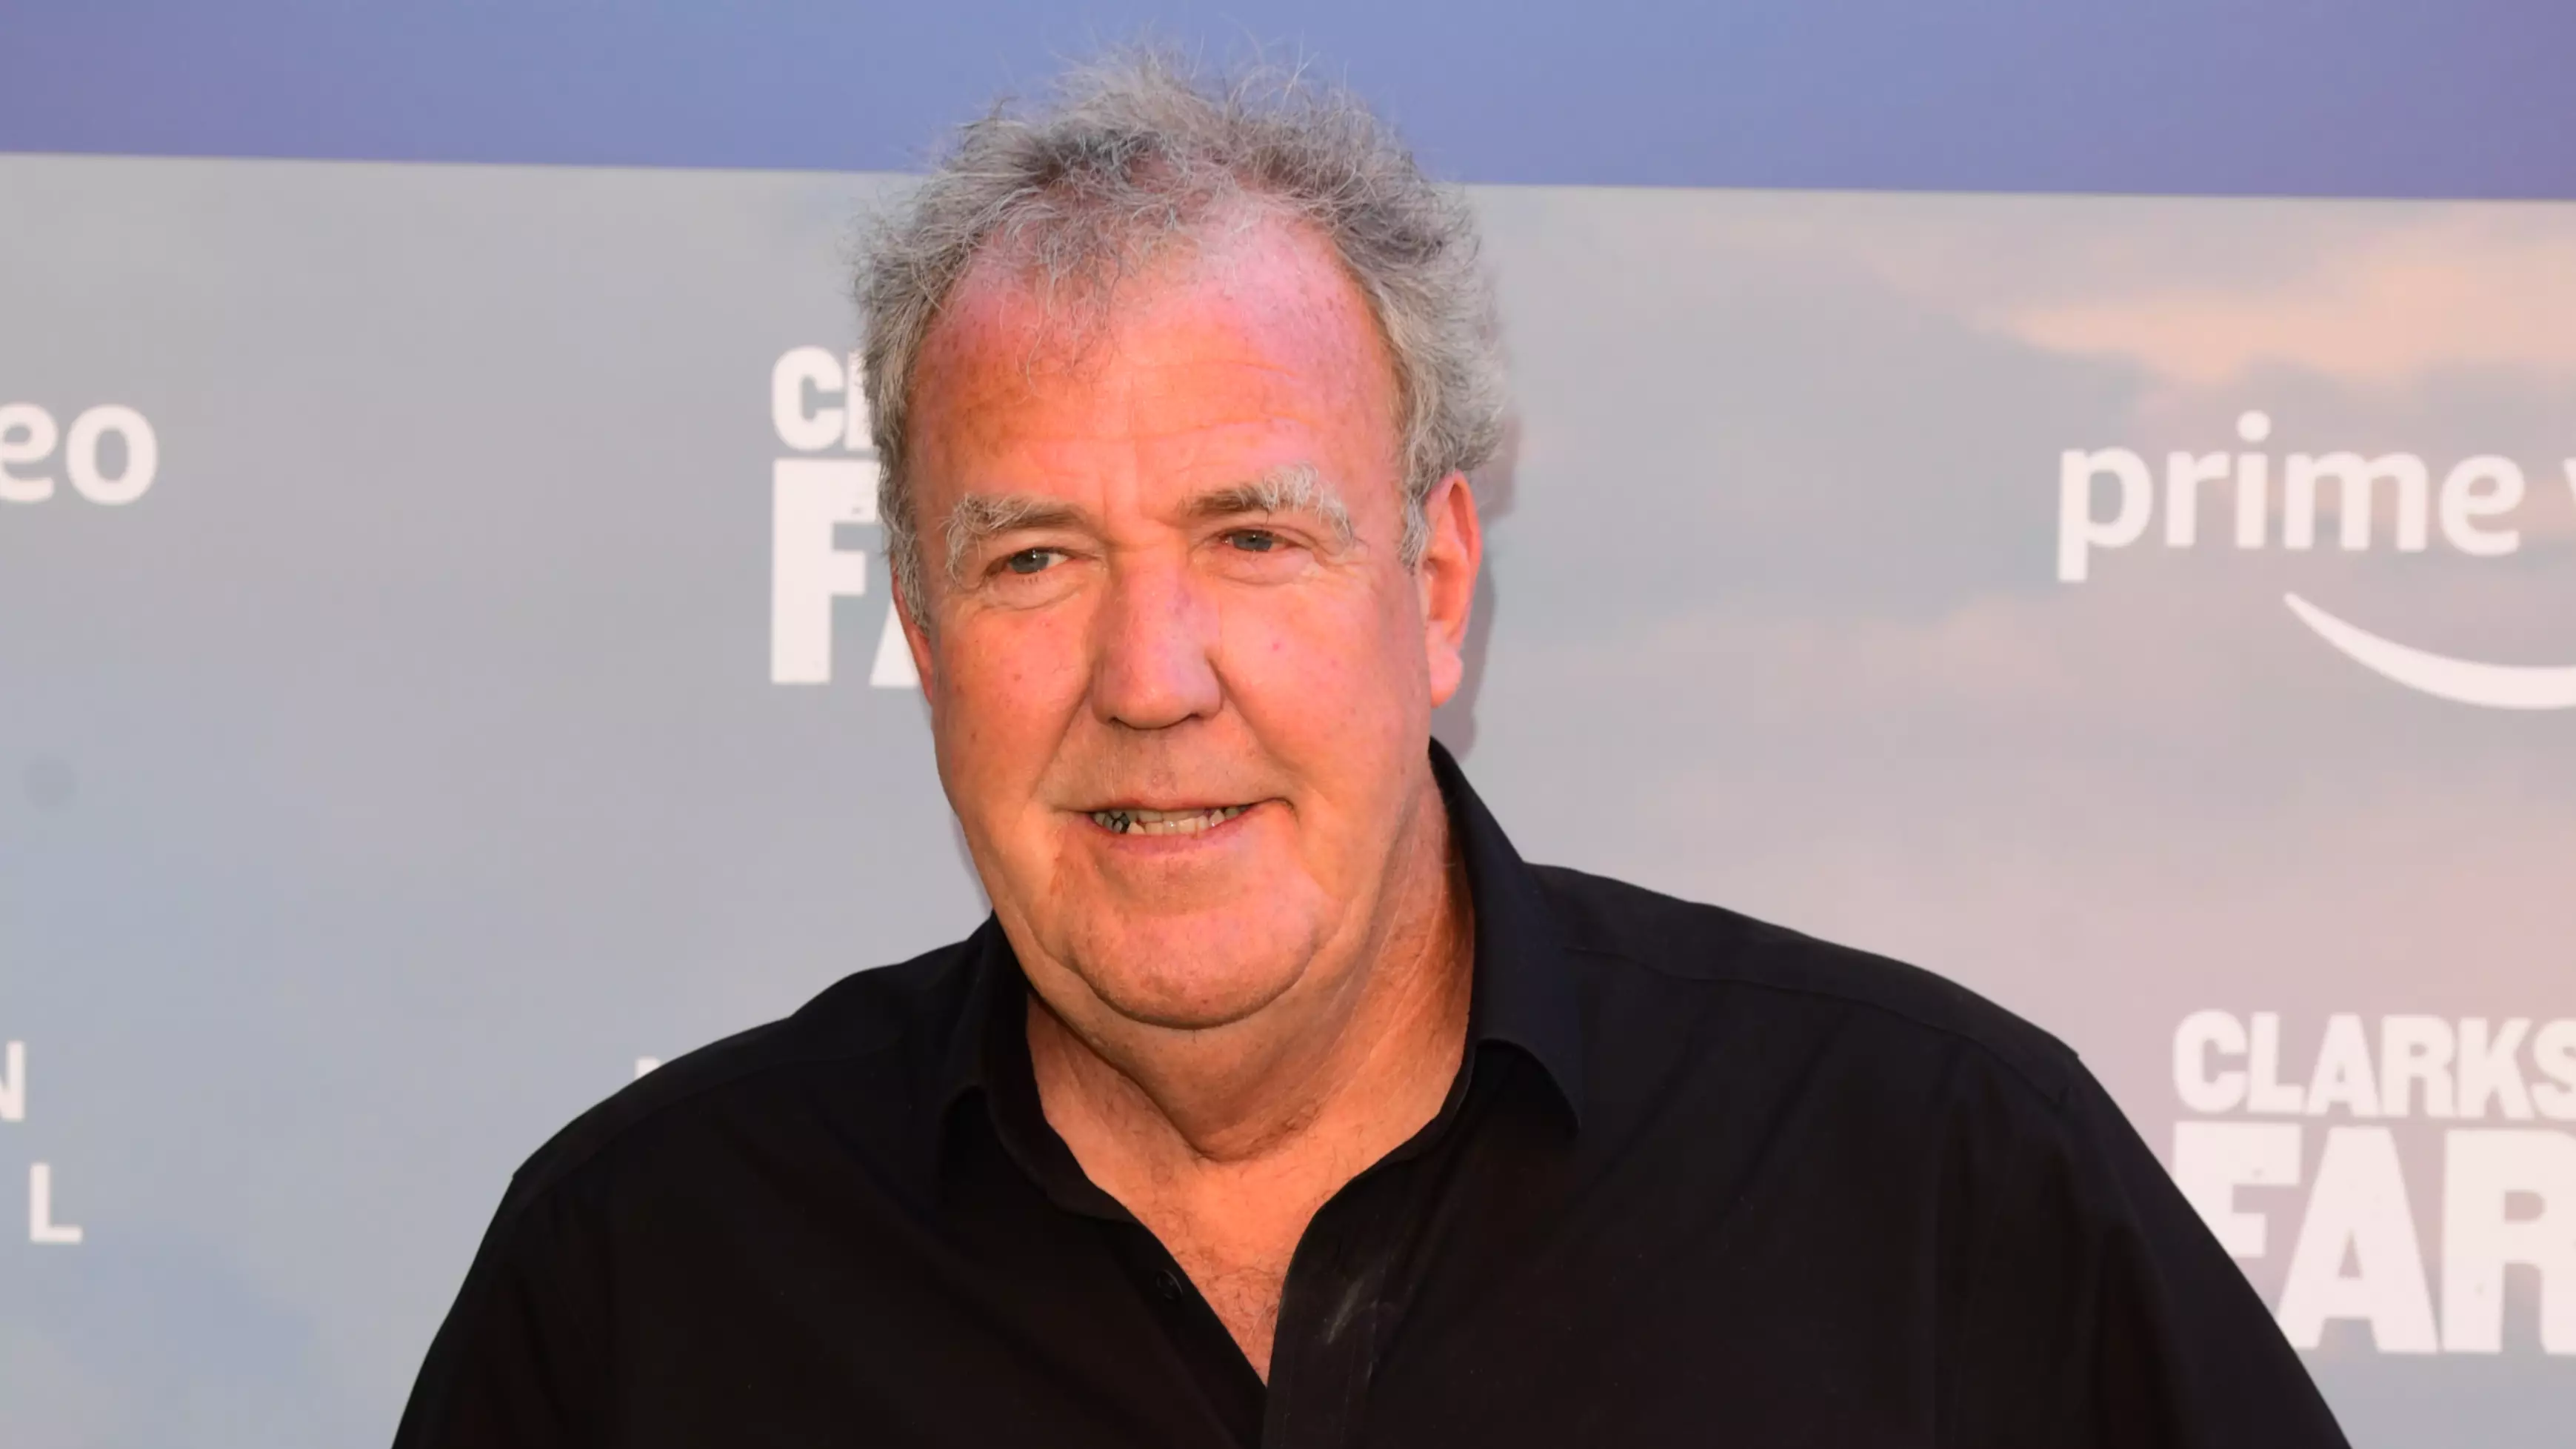 Jeremy Clarkson Almost Had 'Biggest Accident Of His Life' While Filming The Grand Tour